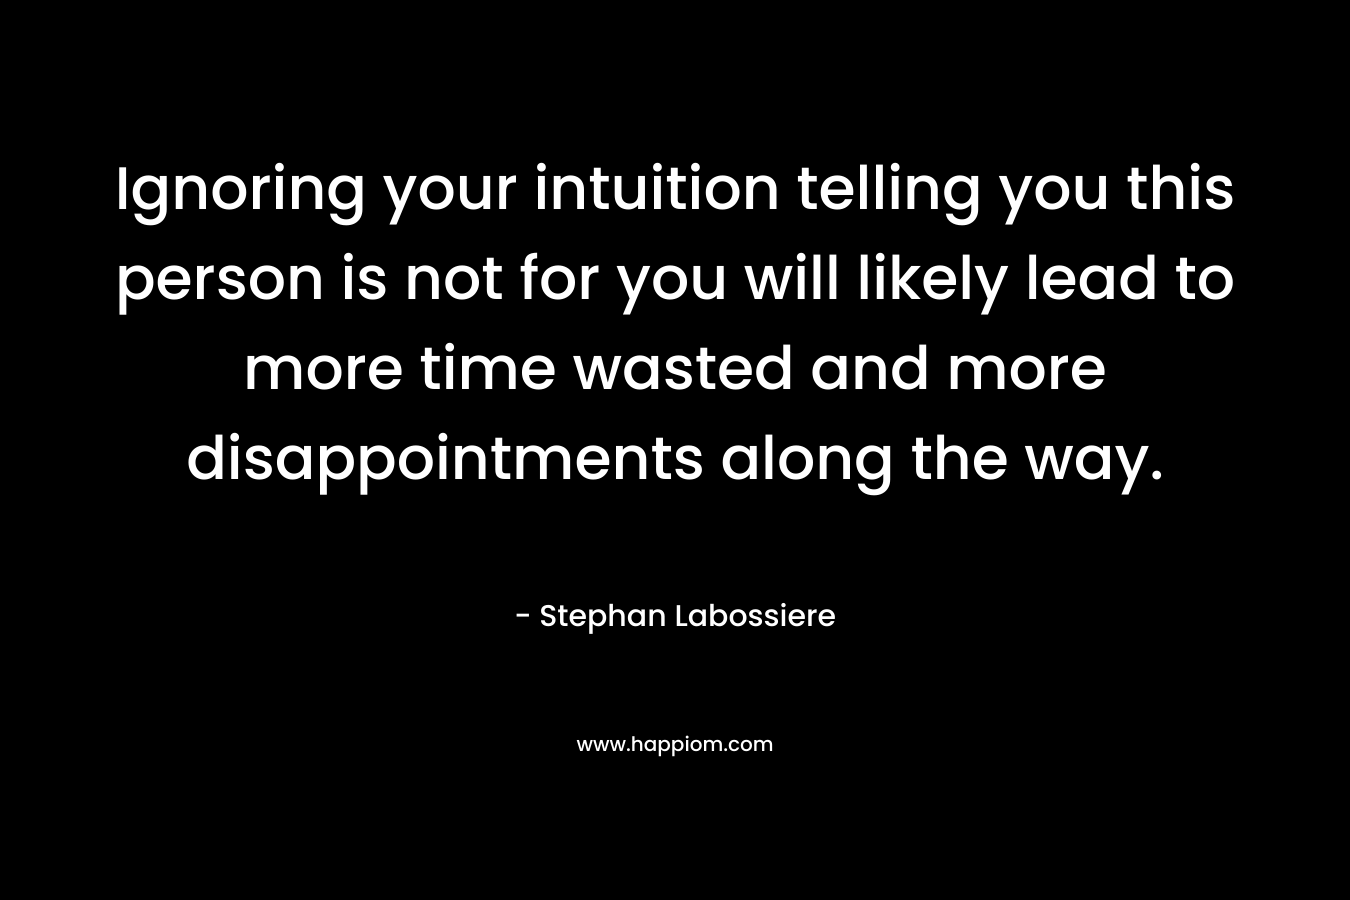 Ignoring your intuition telling you this person is not for you will likely lead to more time wasted and more disappointments along the way. – Stephan Labossiere